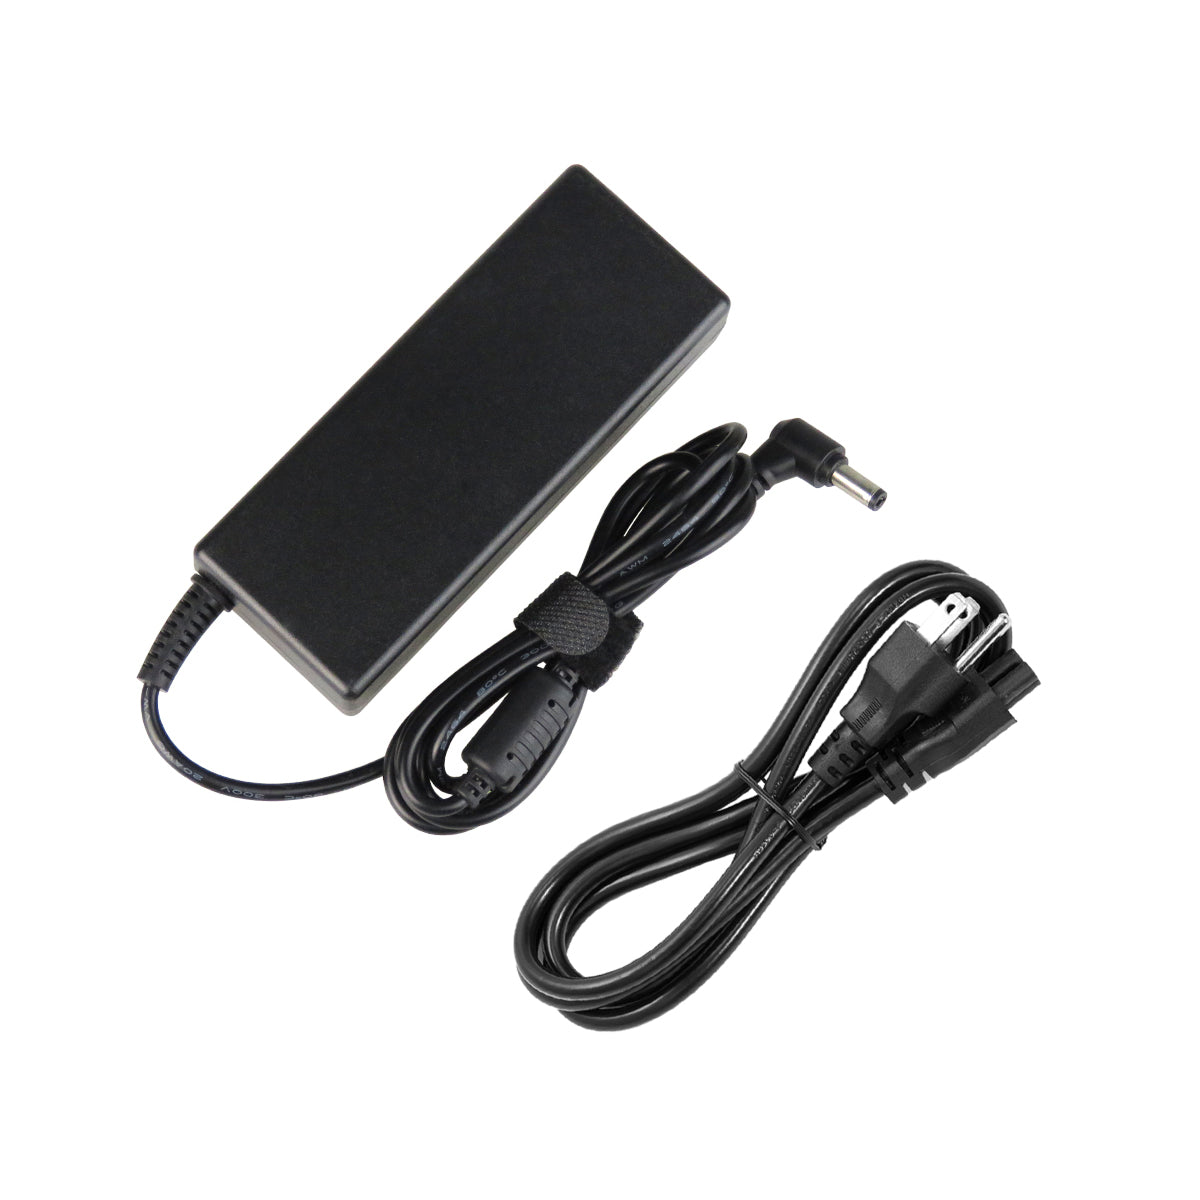 AC Adapter Charger for ASUS X55C-DS31 Notebook.